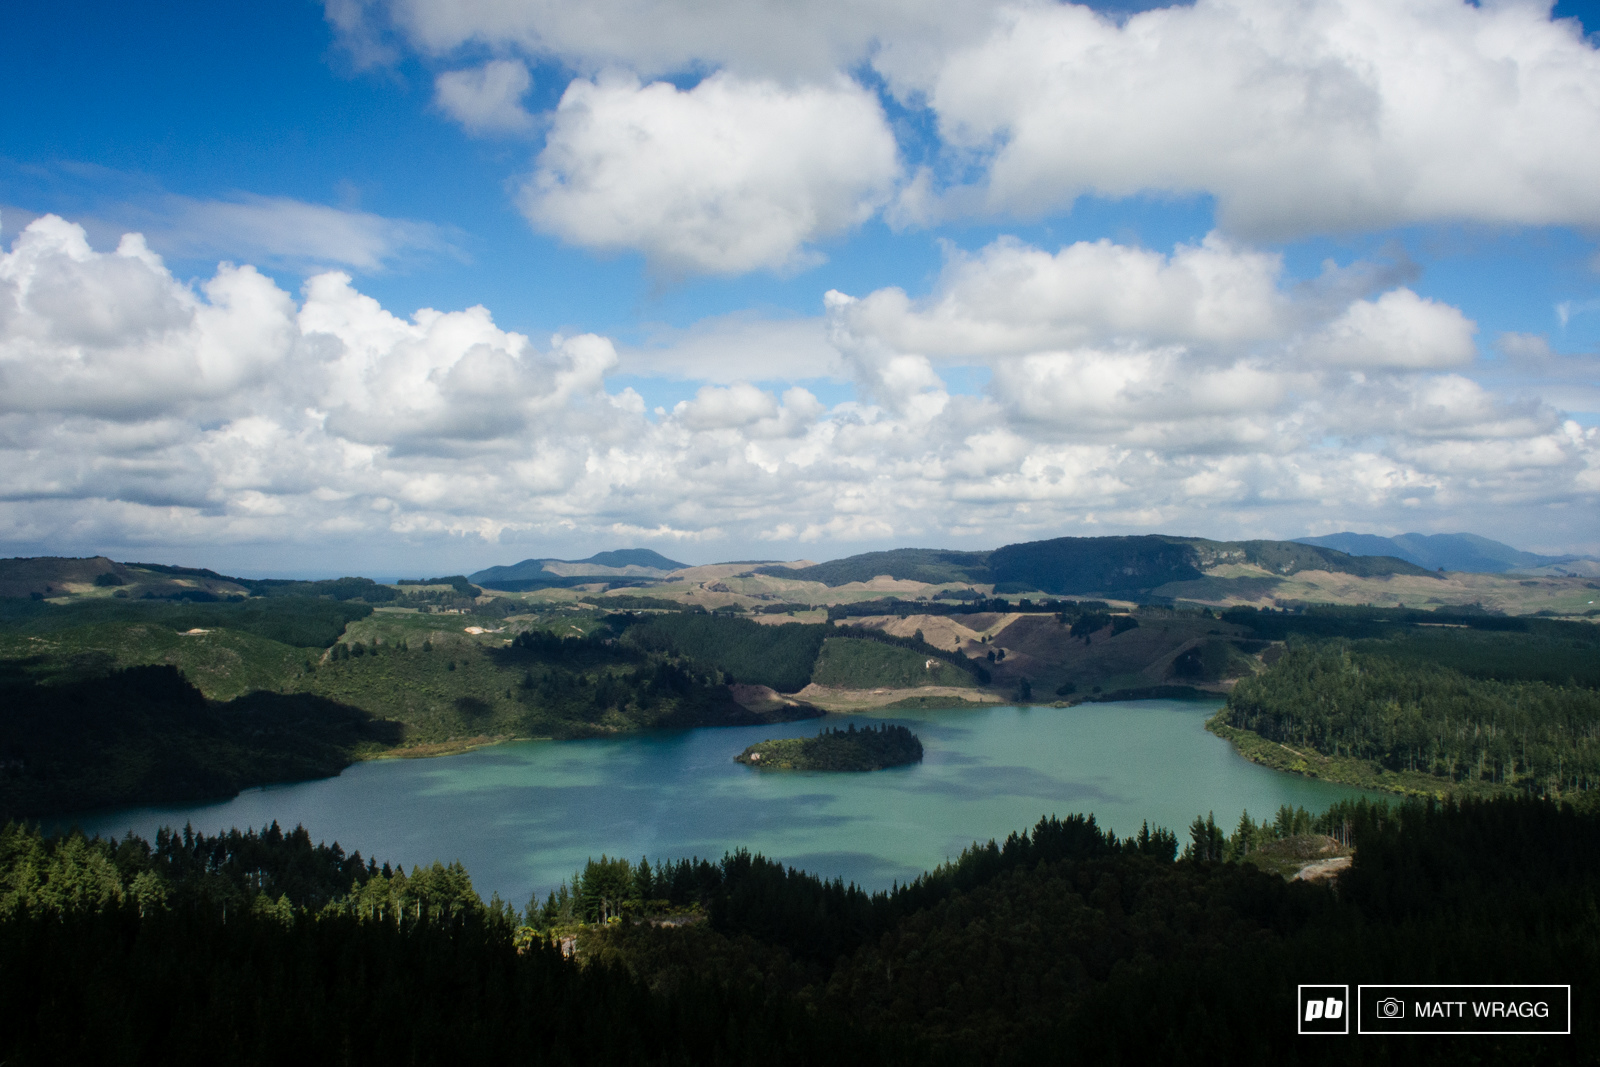 Stages one to six run through the Whakawera forest skirting around the stunning green lake in places.